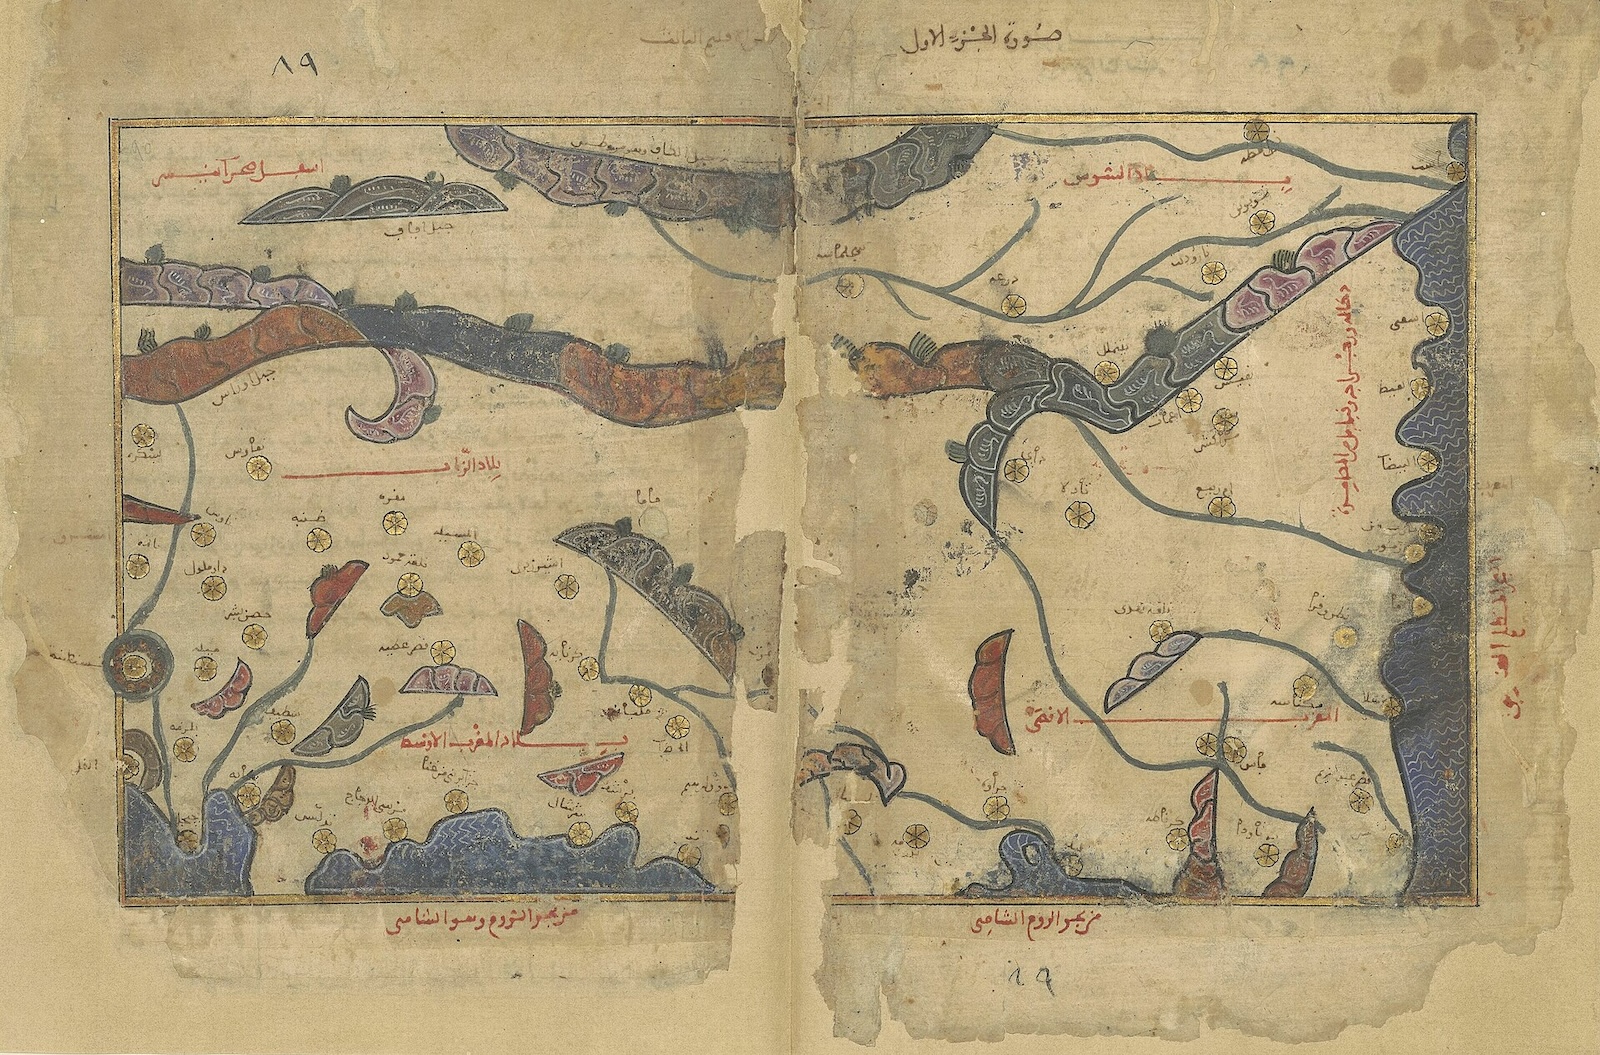 One of the 70 maps by al-Sharīf al-Idrīsī (d. 1164–65 or 1175): preserved in MS Paris, Bibliothèque nationale de France, Arabe 2221 (fols 89b–90a). The image shows a map which contains the west-most regions of North Africa, with the North-African coastline of the Mediterranean. 